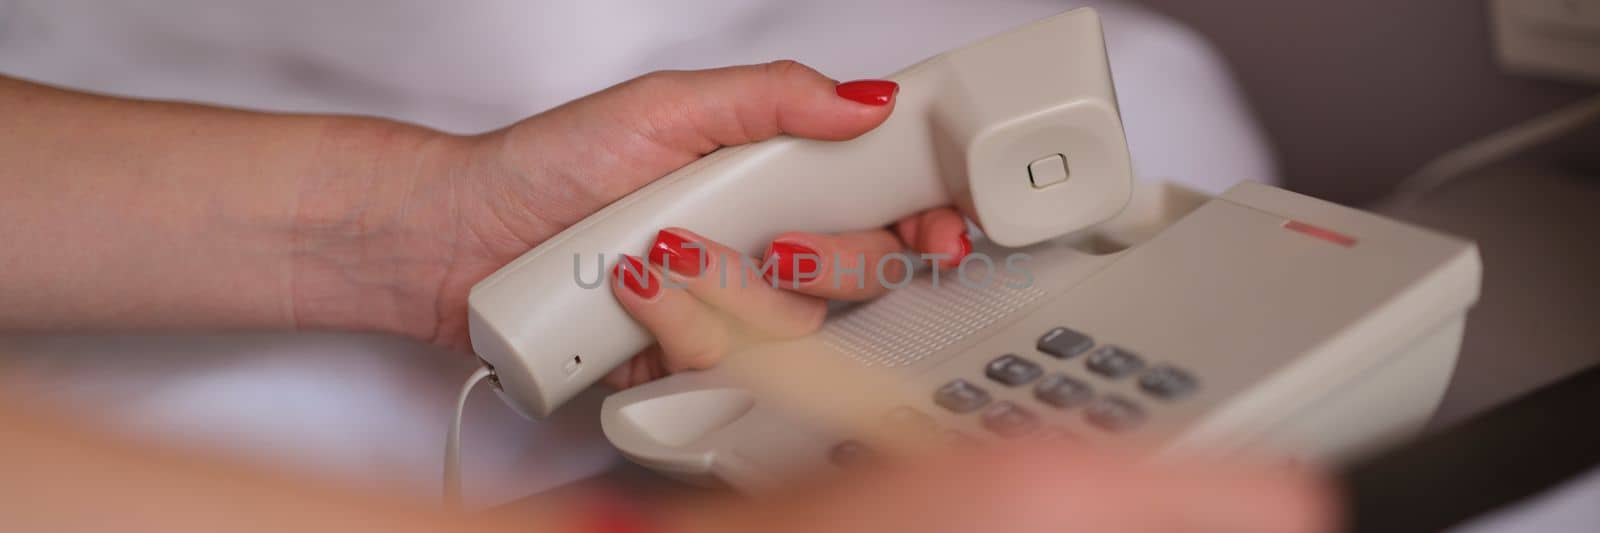 Woman picks up phone and dials number for room service in hotel closeup by kuprevich